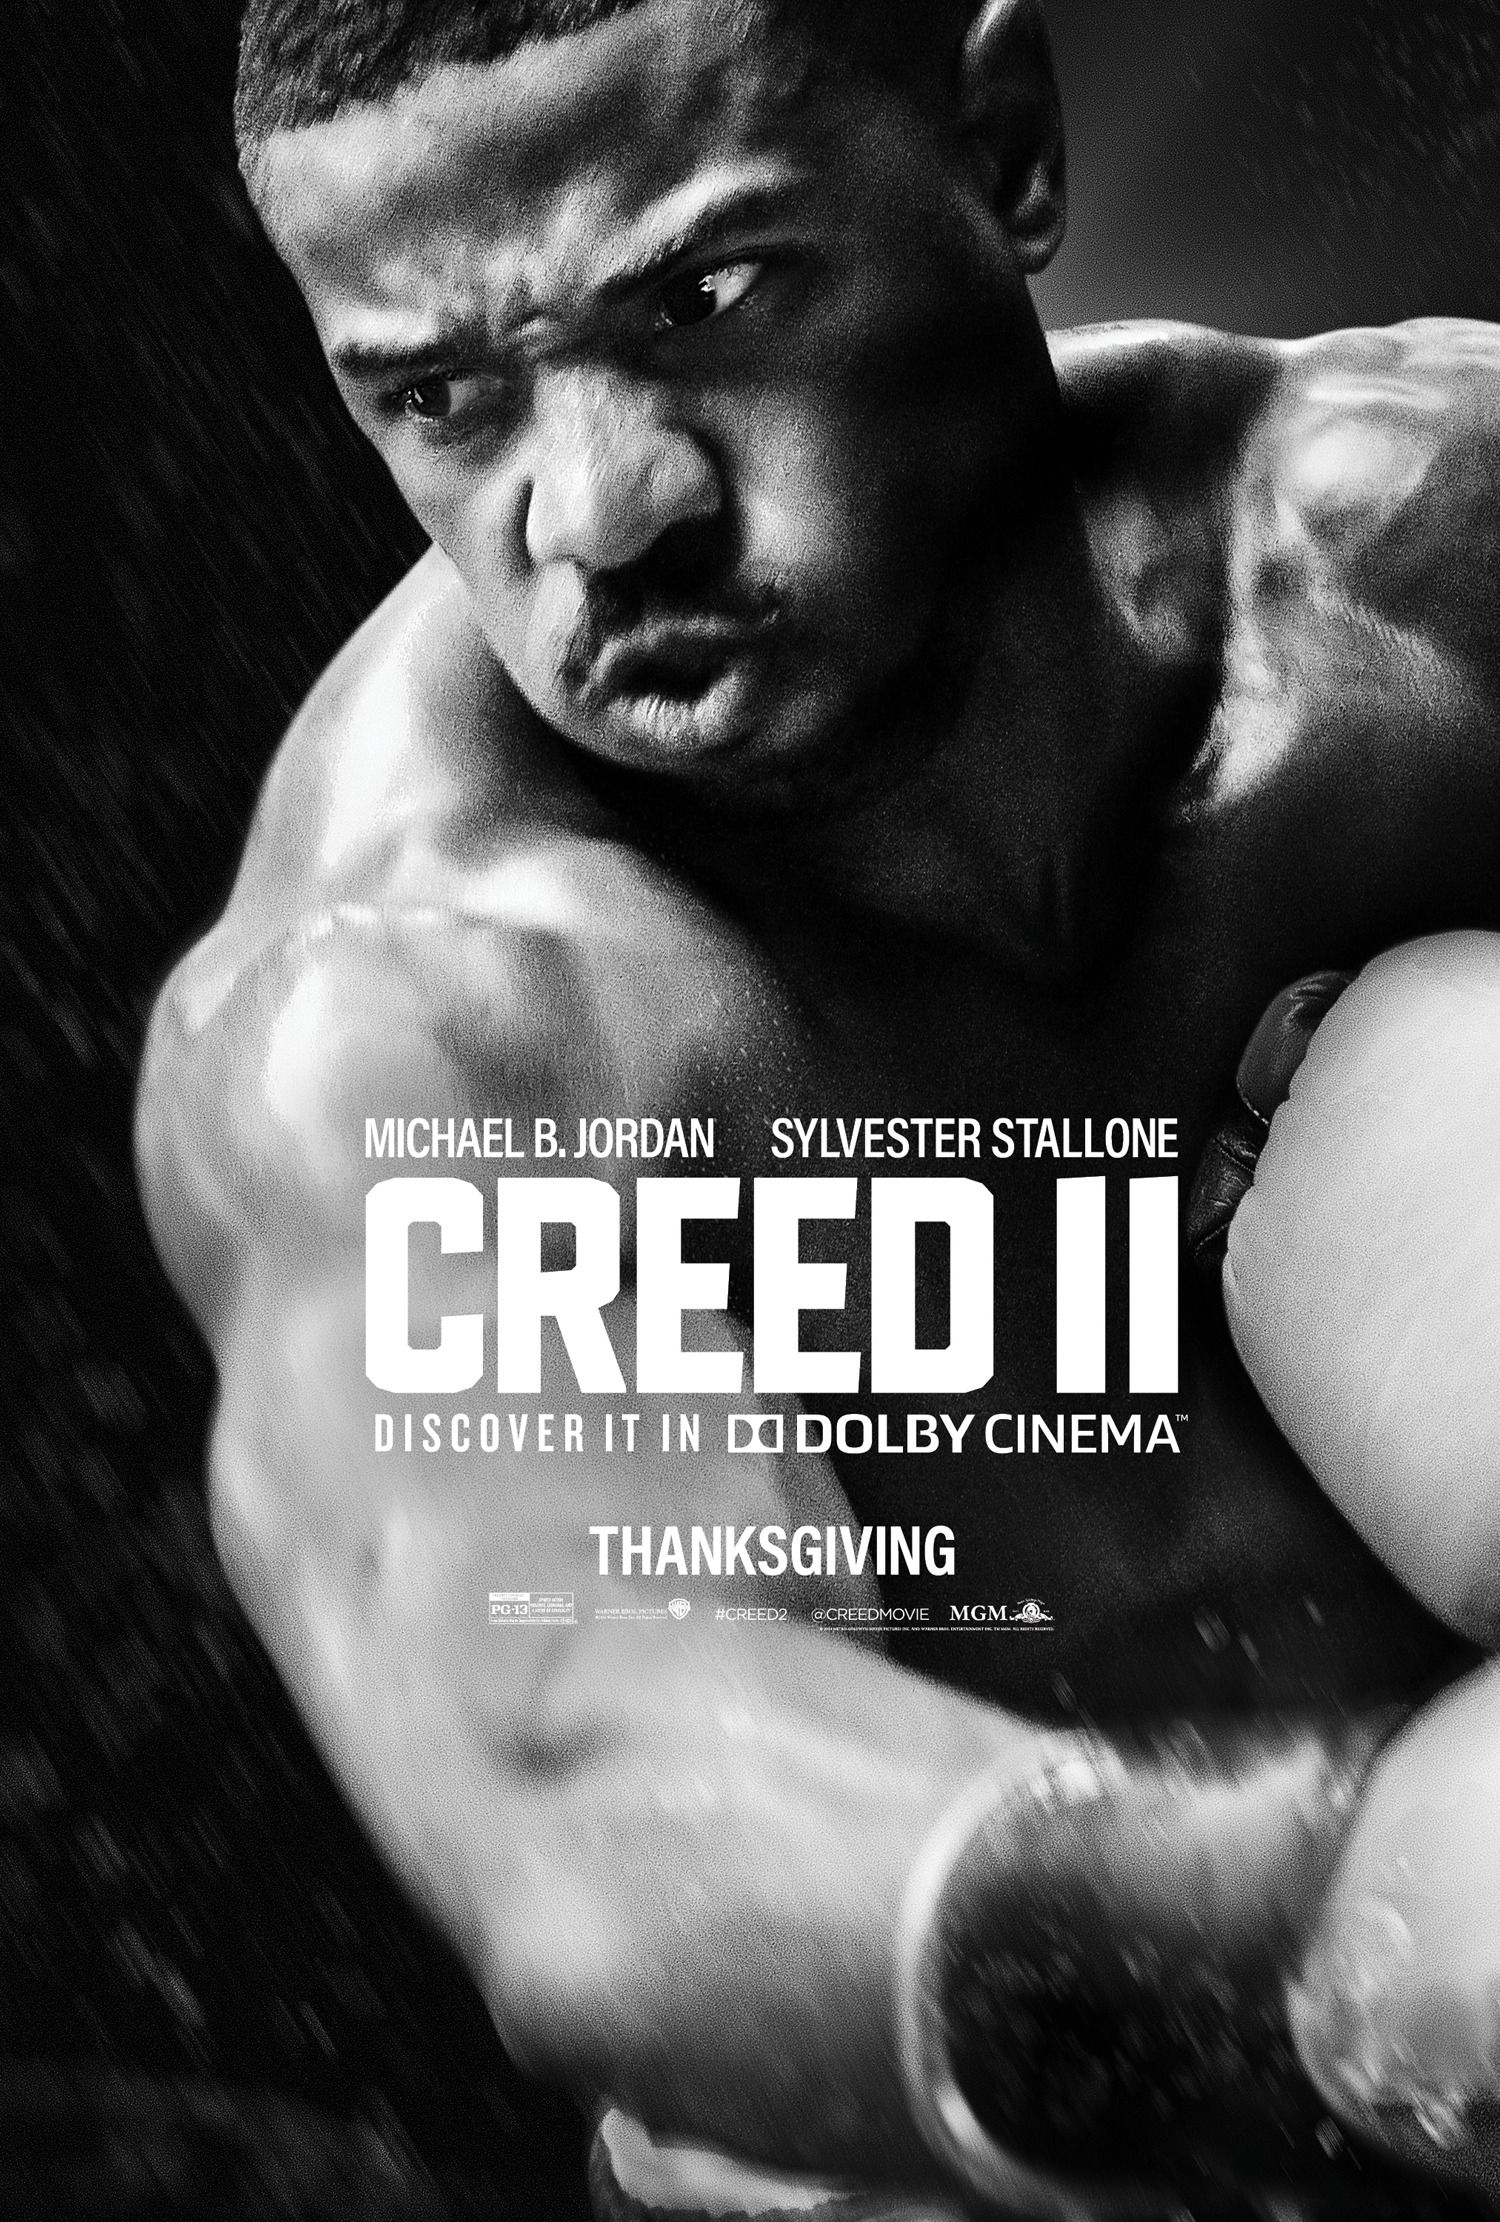 Dolby Poster For Creed II Movies, Television